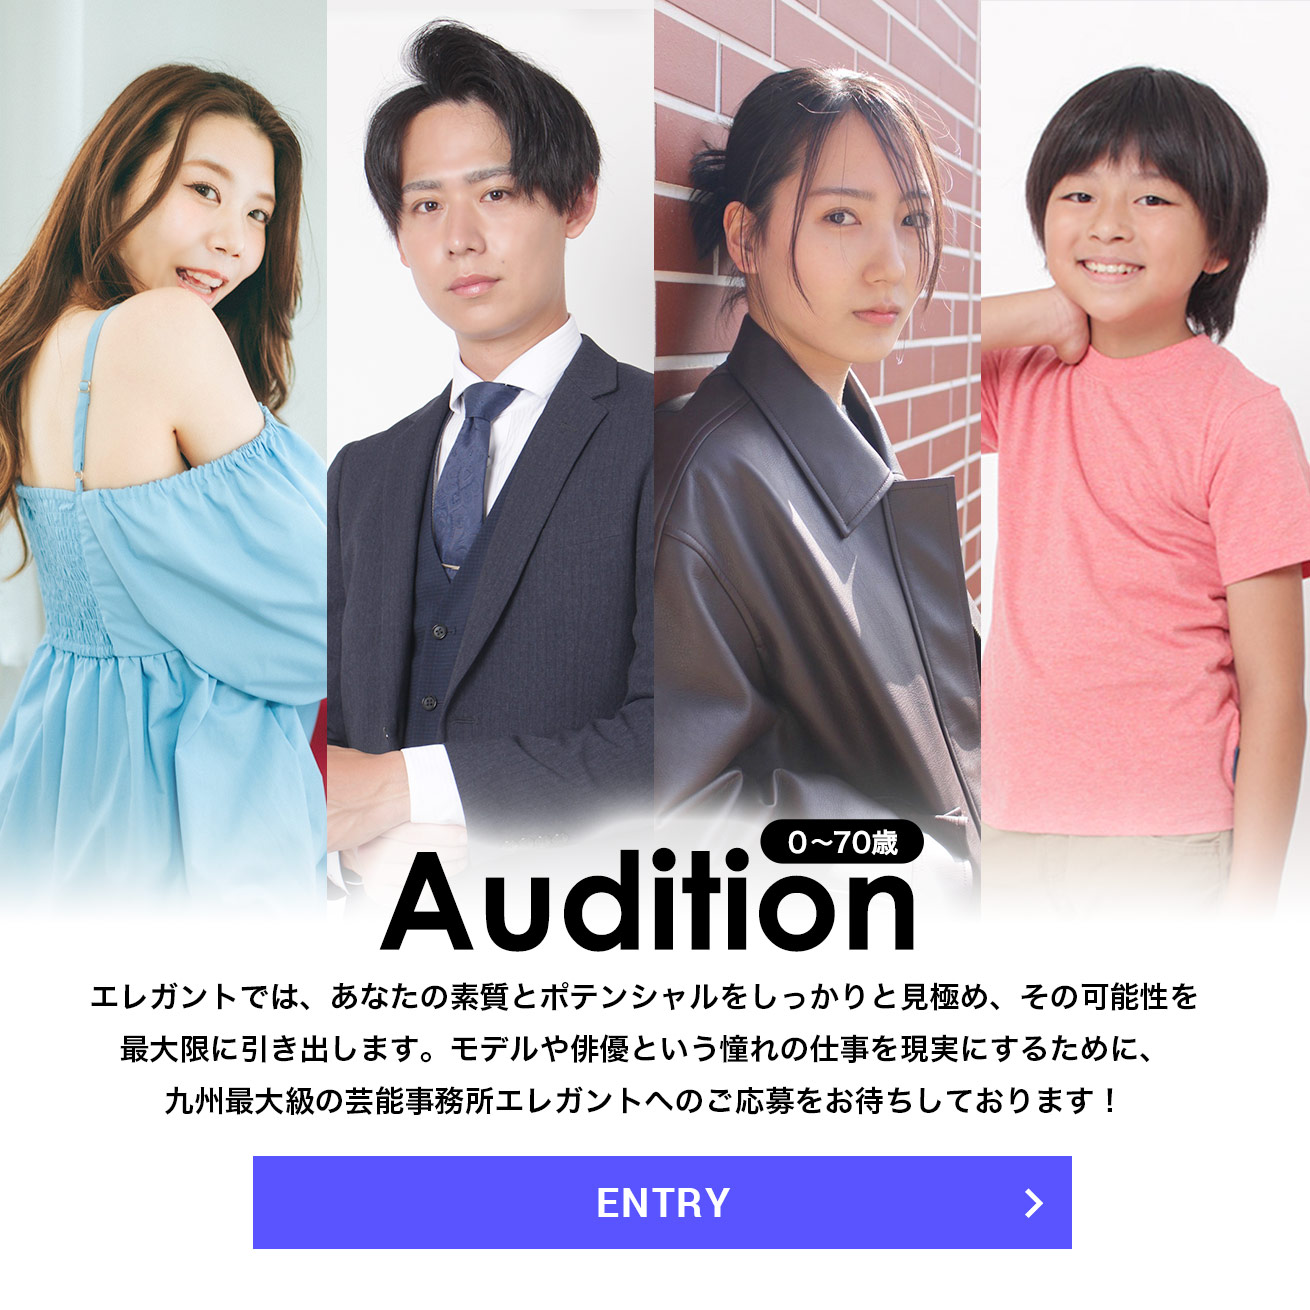 Audition 0〜70歳